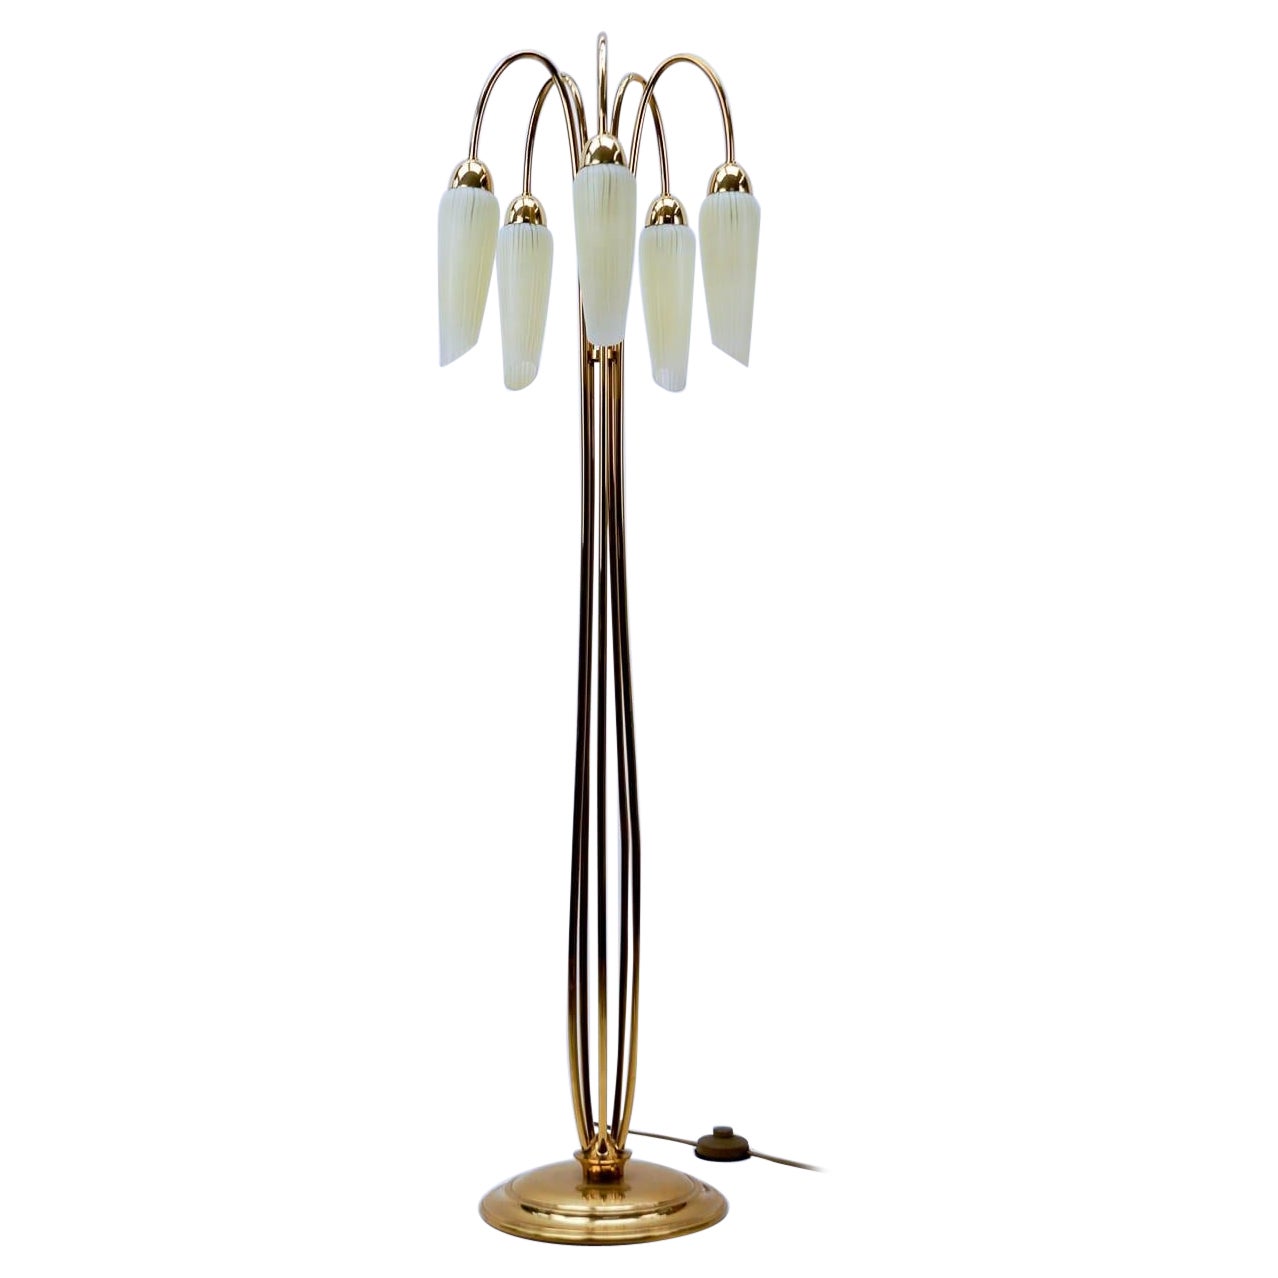 Very Rare Mid-Century Modern Floor Lamp with Five Glass Shades, 1950s Italy